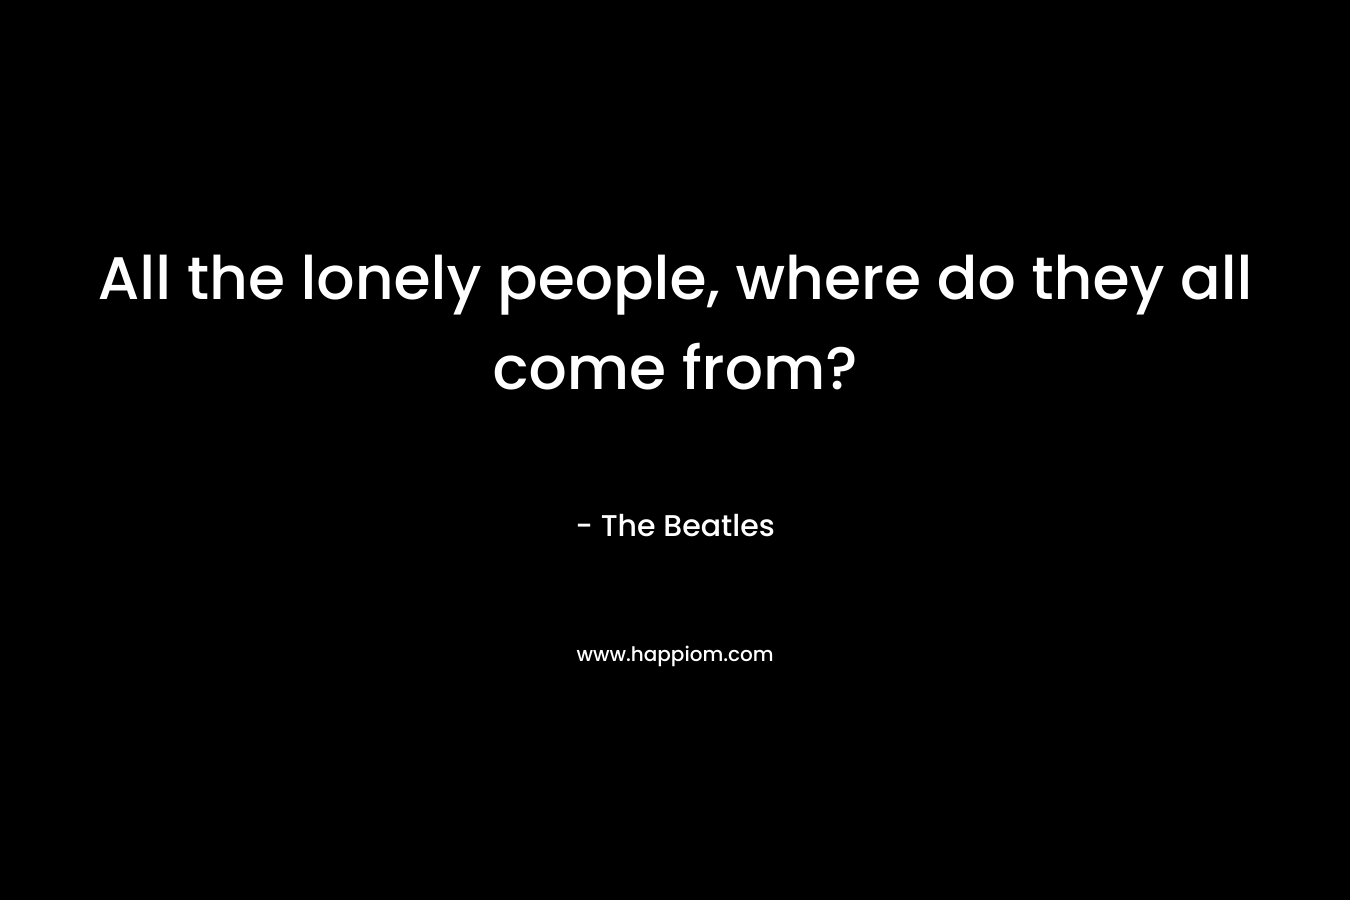 All the lonely people, where do they all come from? – The Beatles